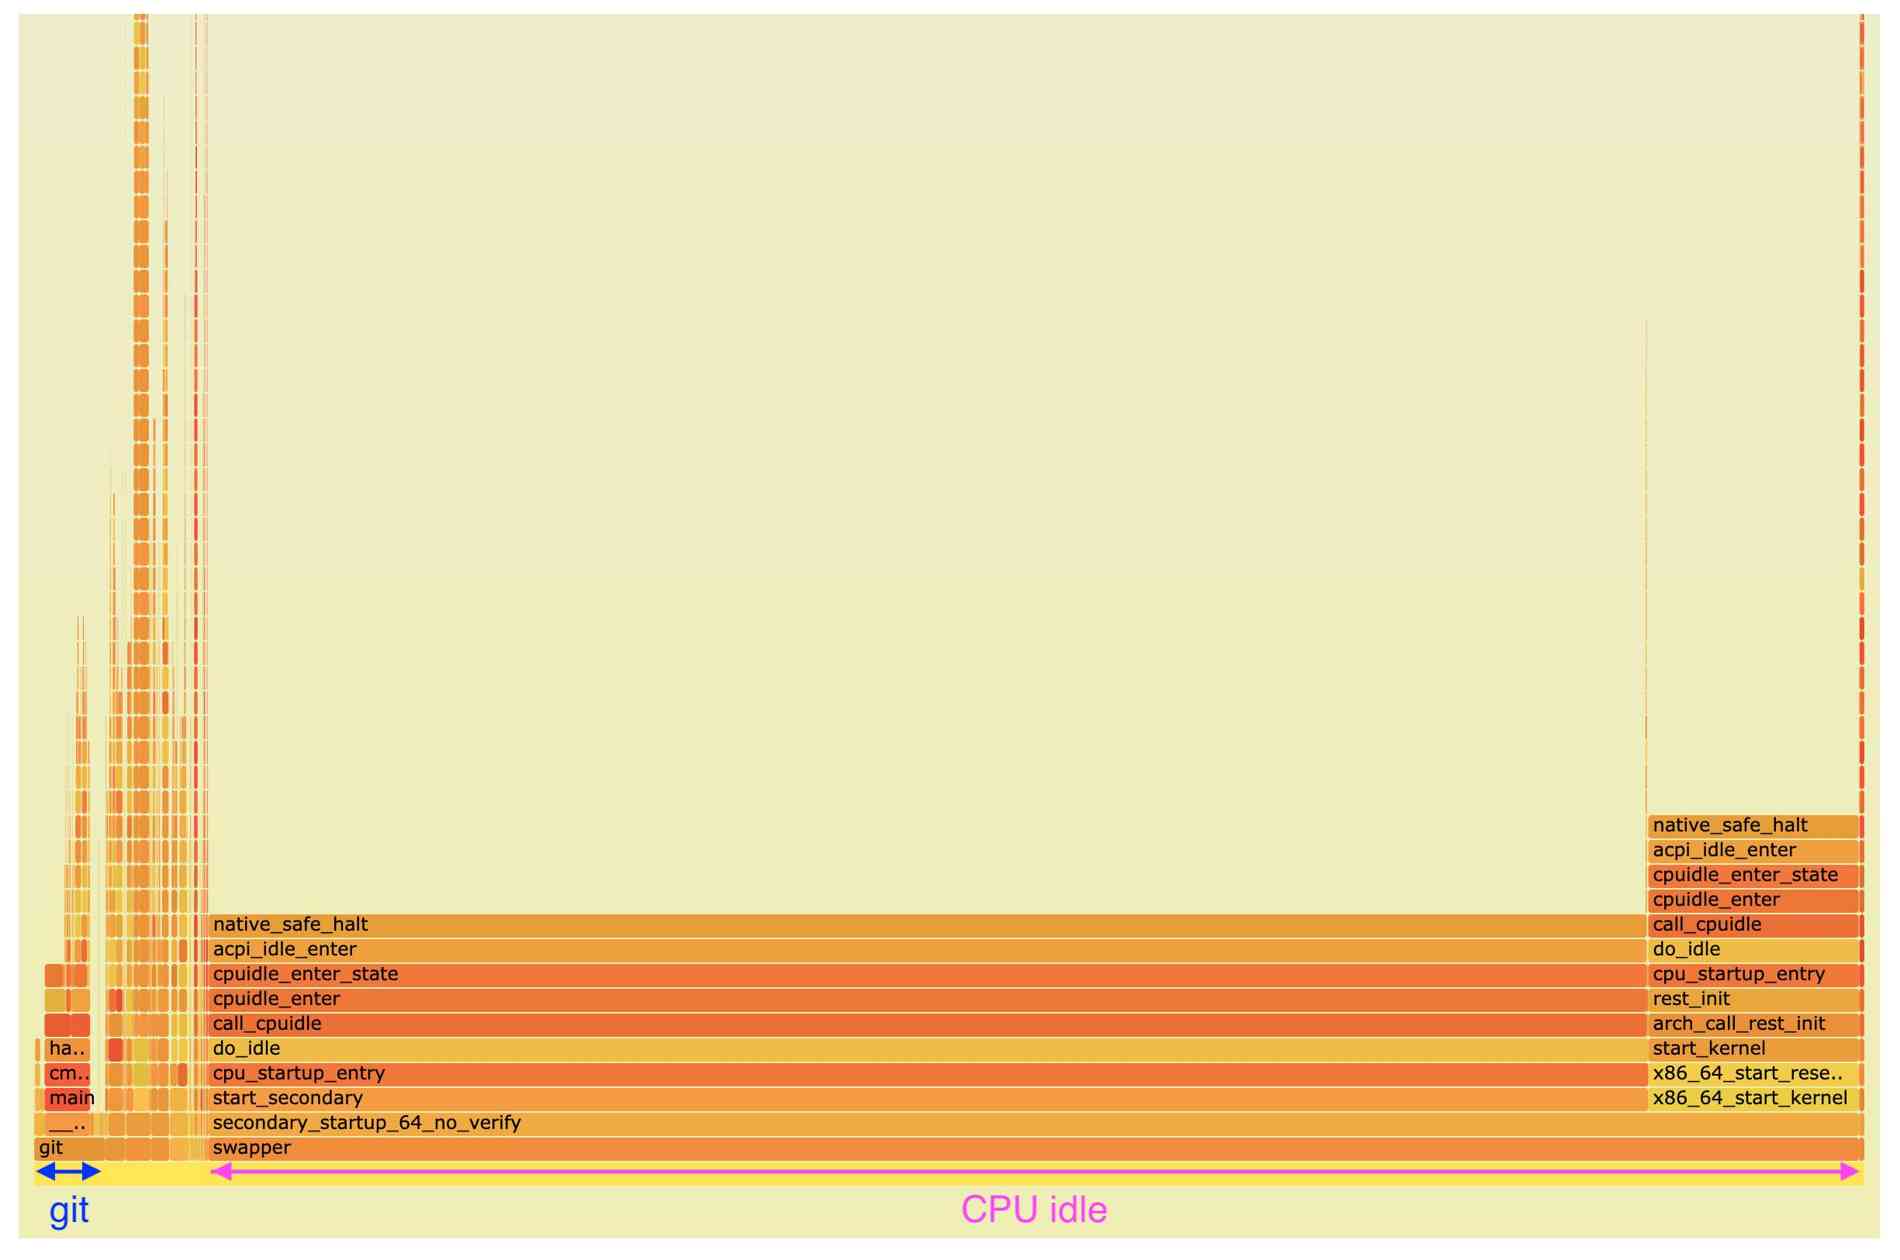 Flamegraph of GitLab 14.6 performance with
cache